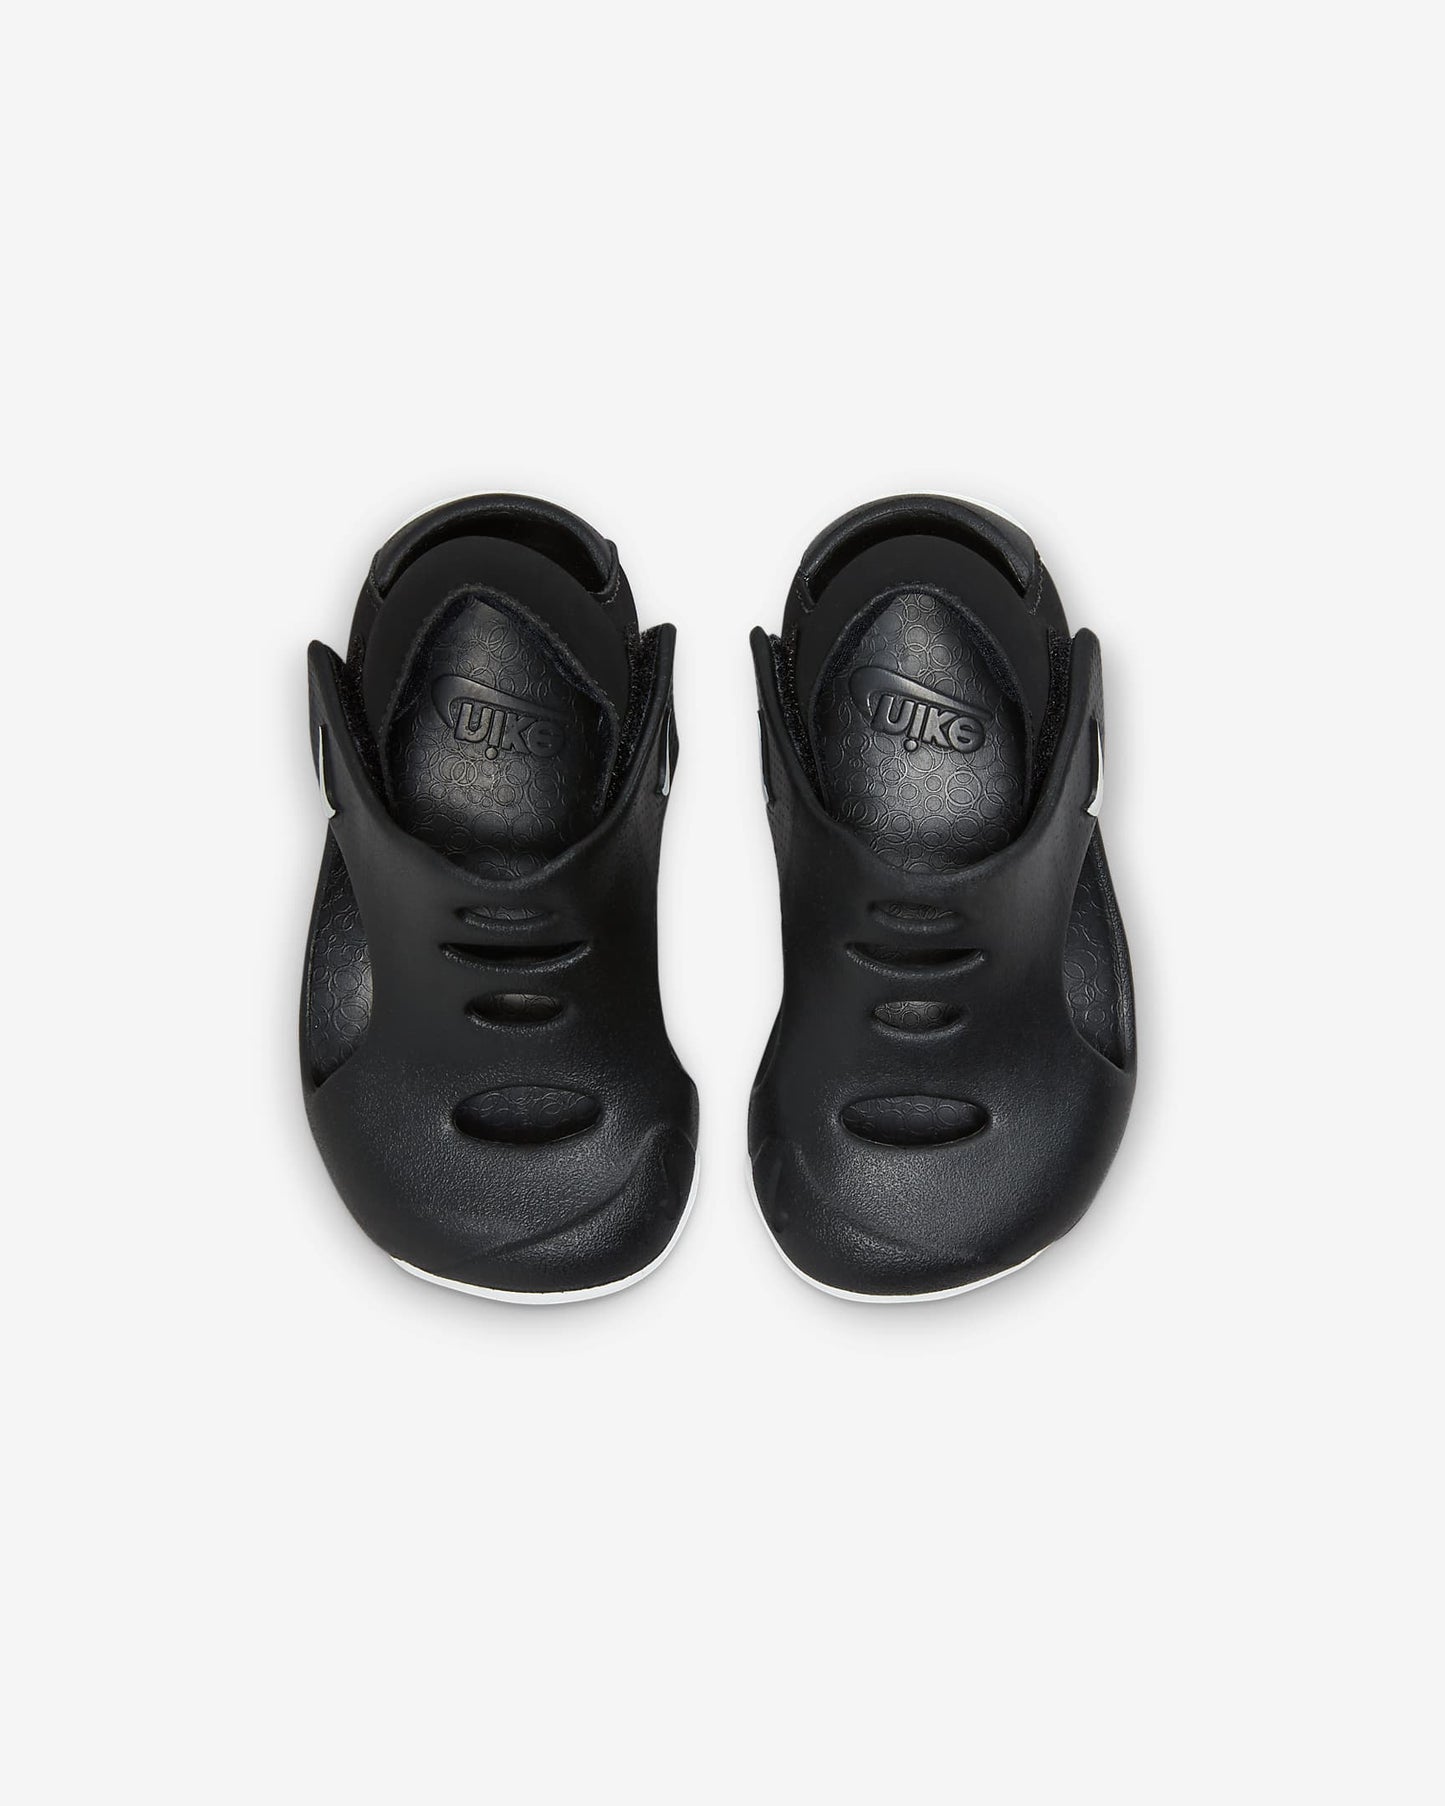 Nike Sunray Protect 3 Toddler Black (DH9465-001) - CM - R1L